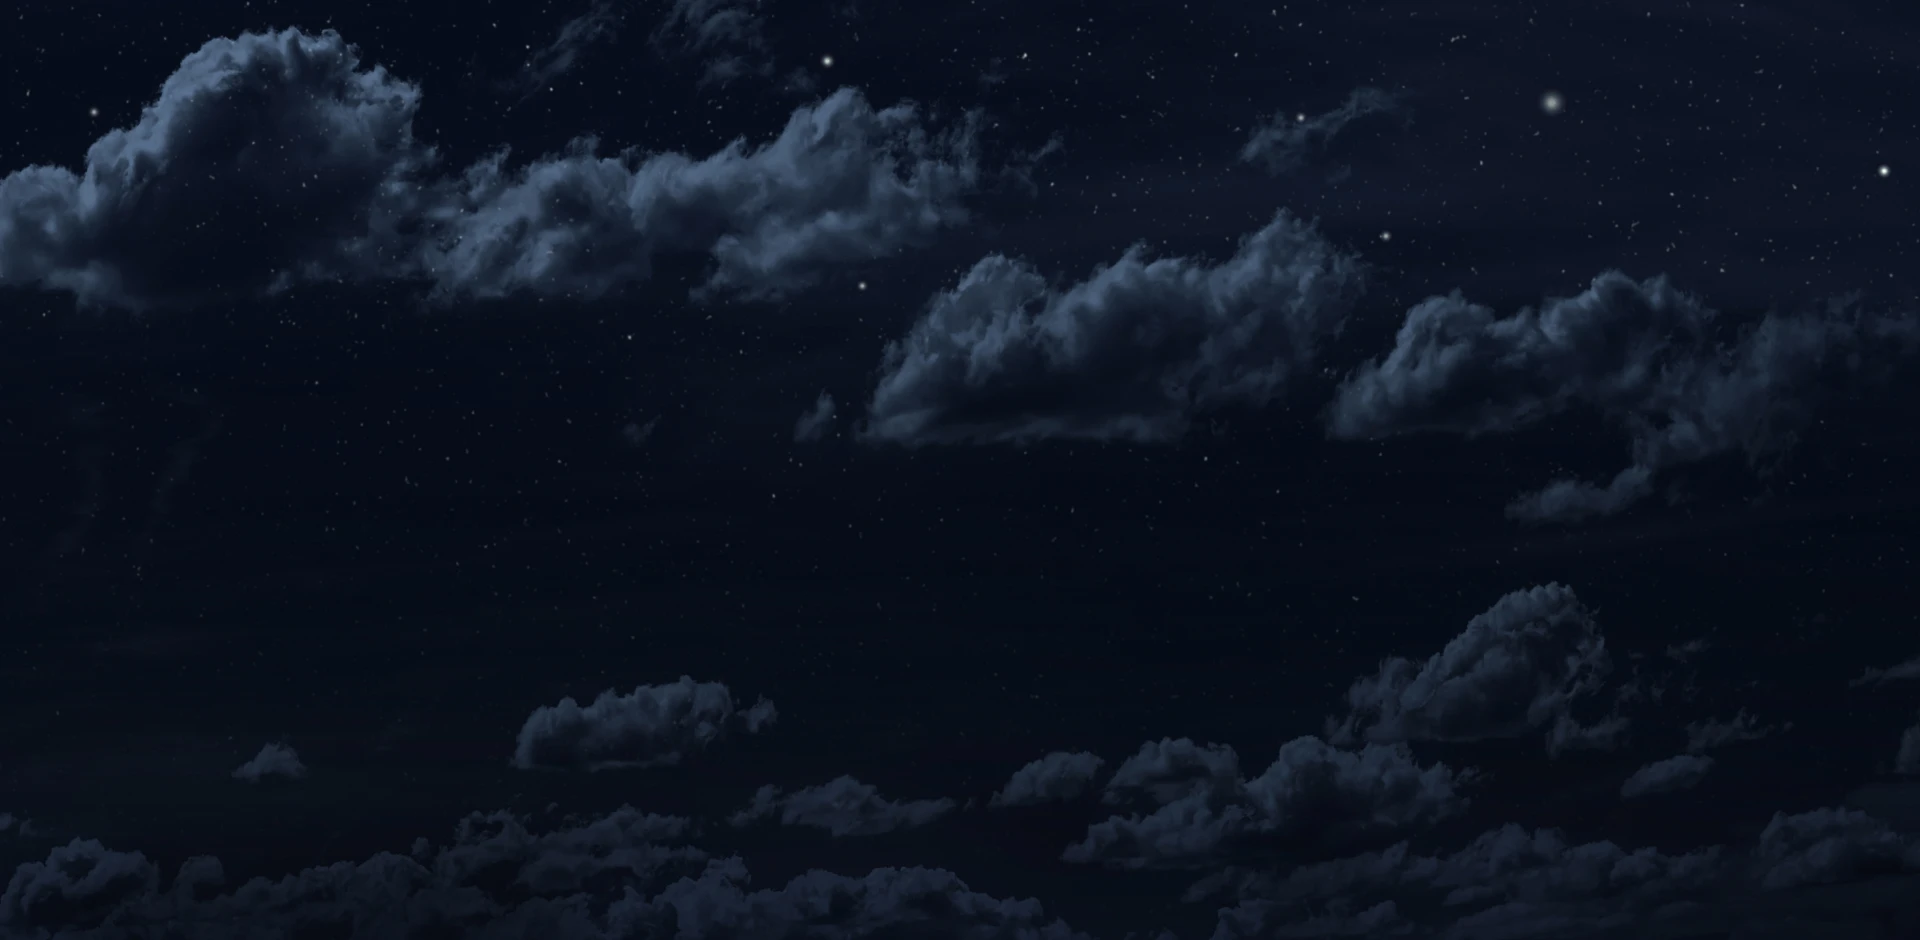 Starry sky covered with clouds